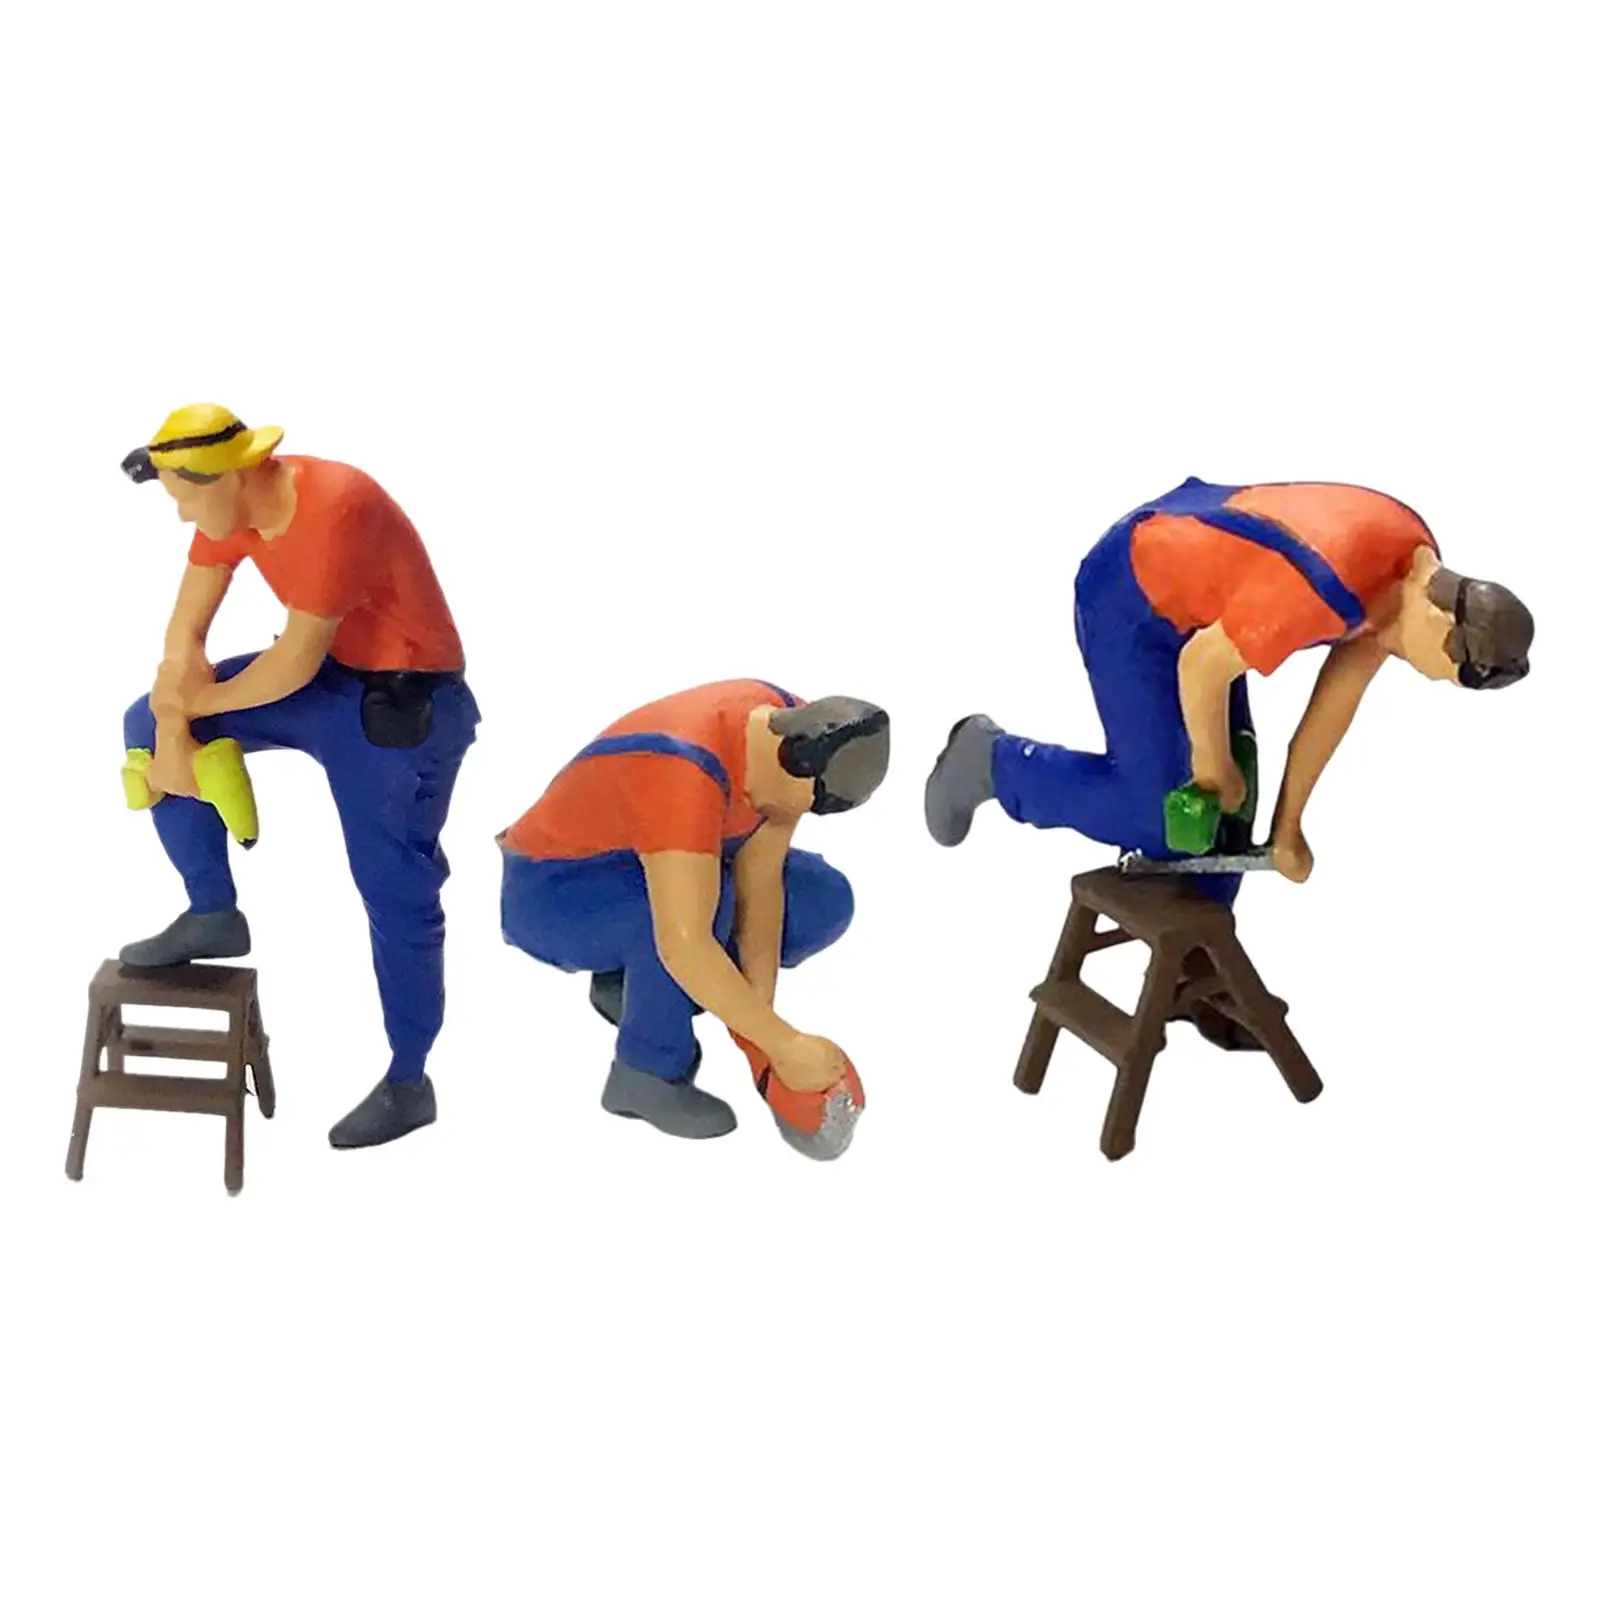 1/87 People Figure Collectibles Miniatures Kids Toys Repairman Character Scenery